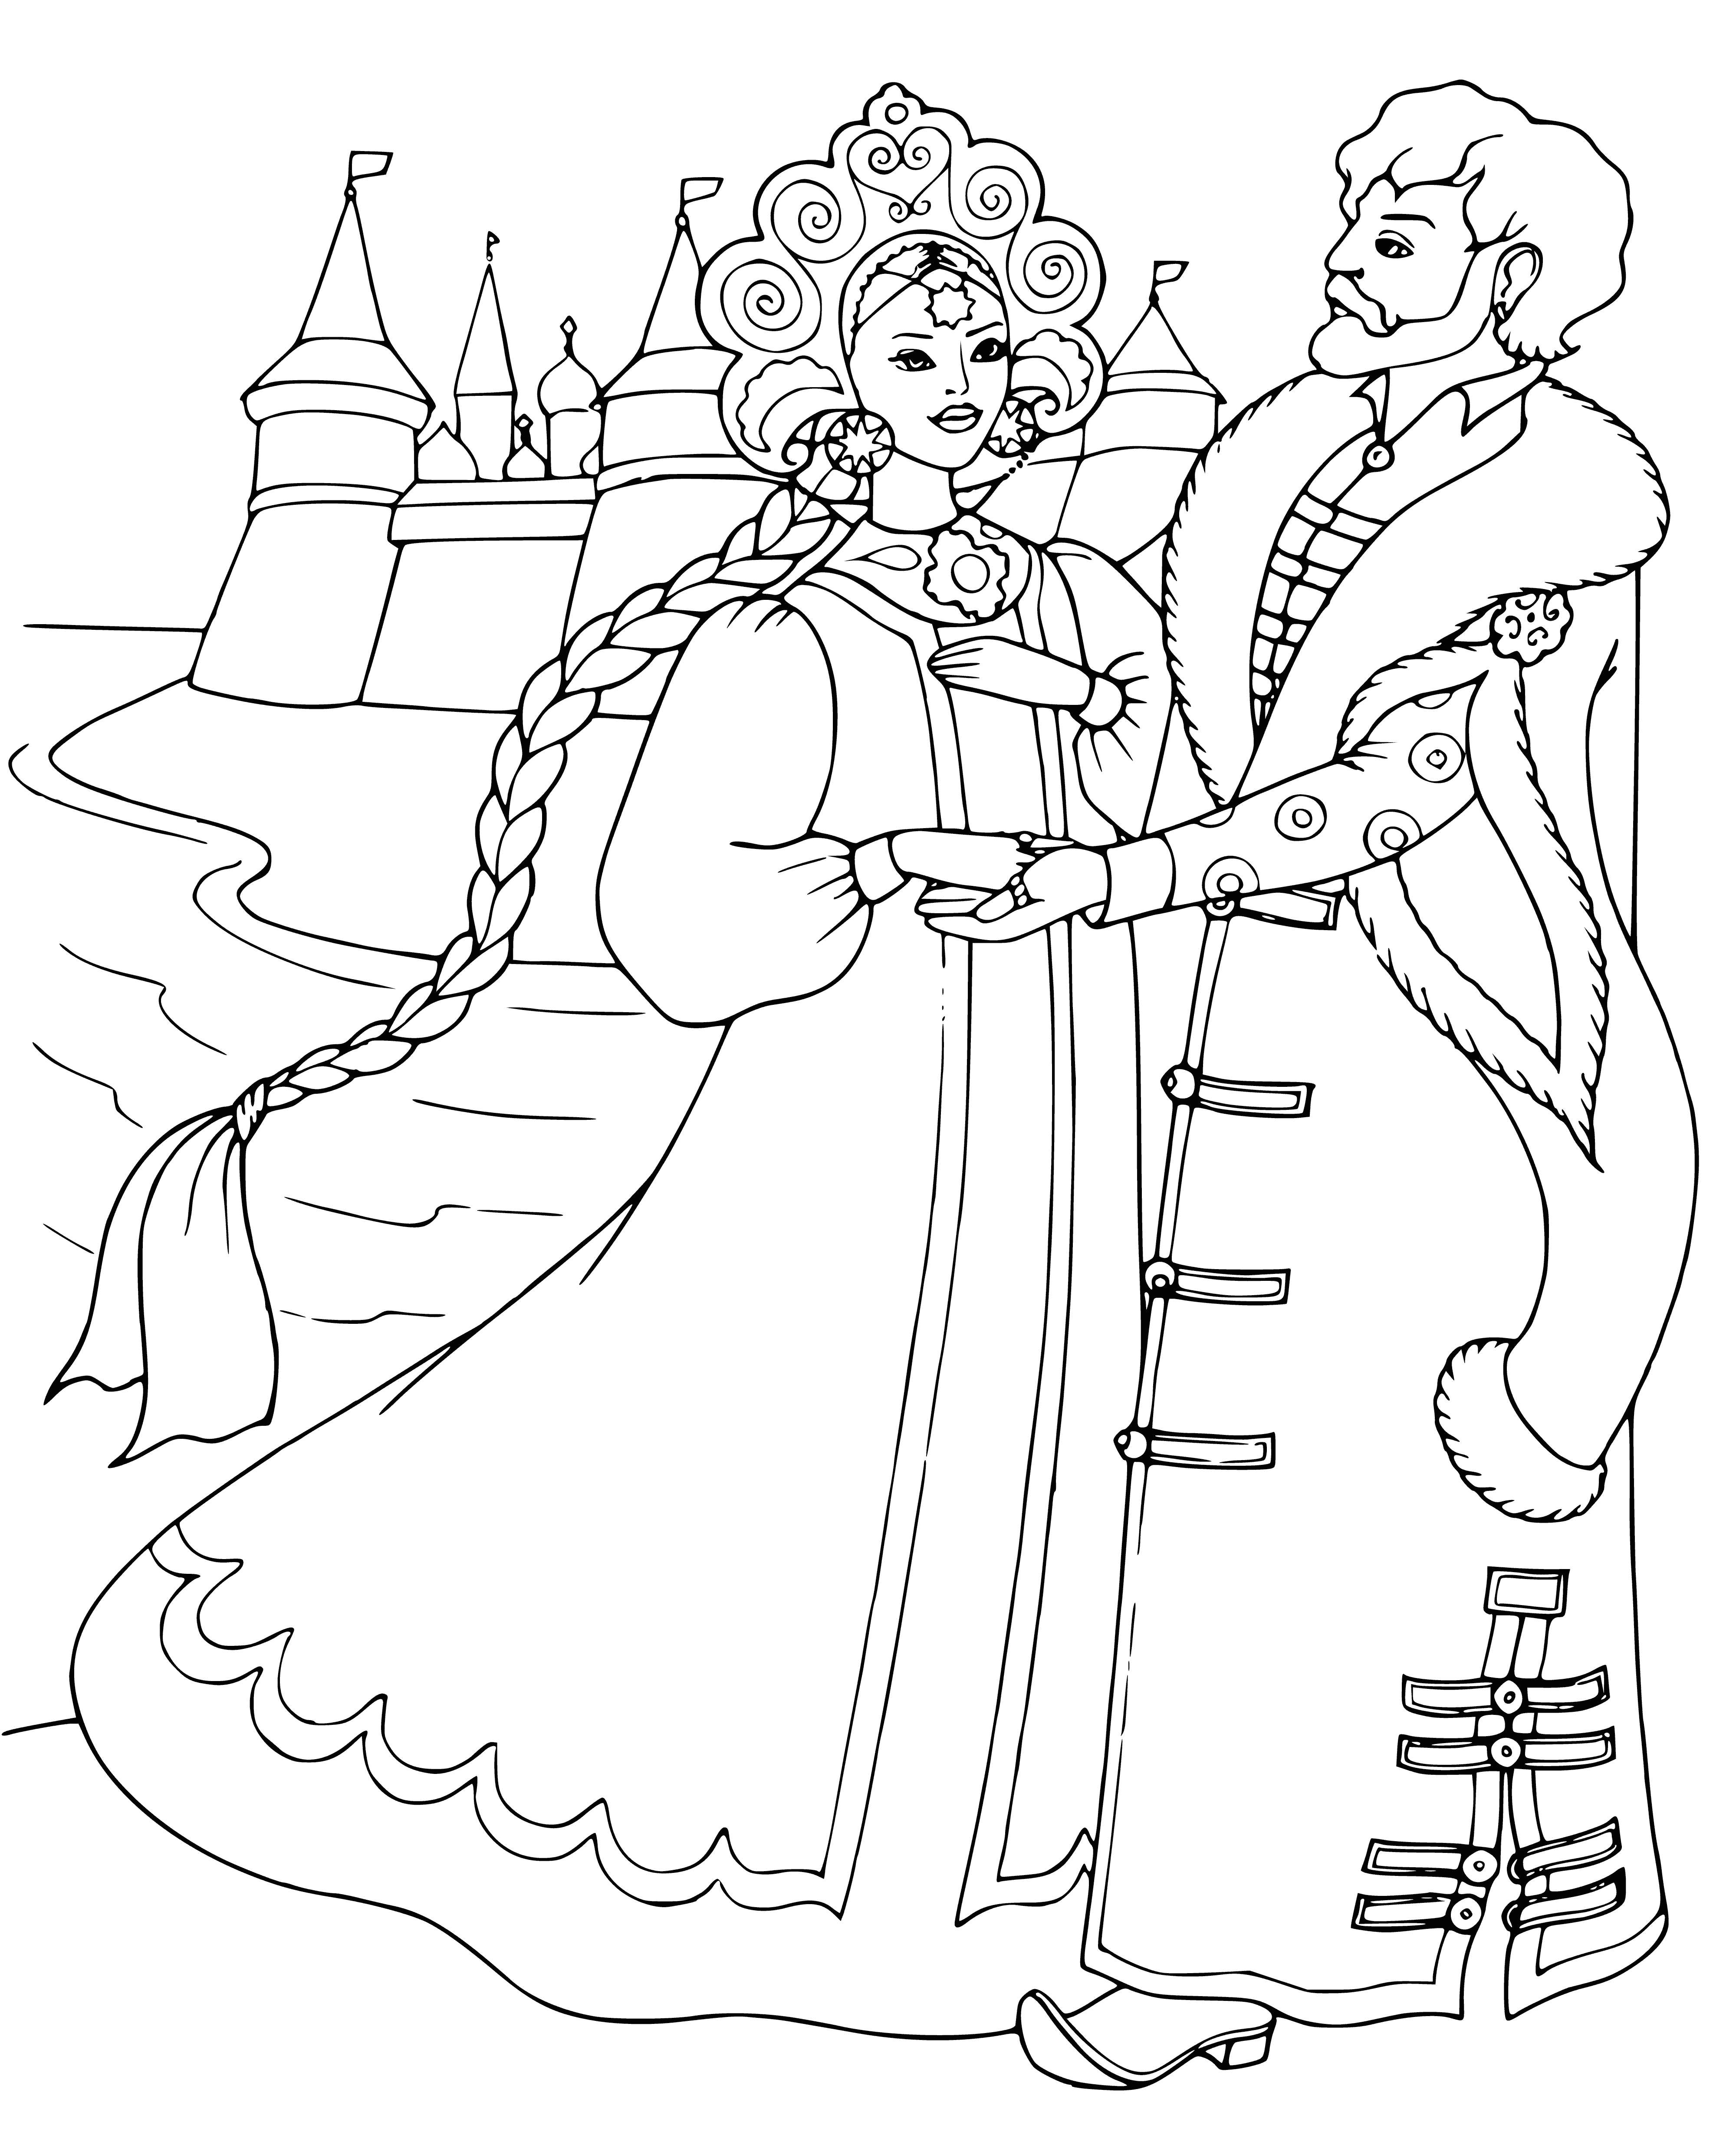 Prince Guidon and the Swan Princess coloring page